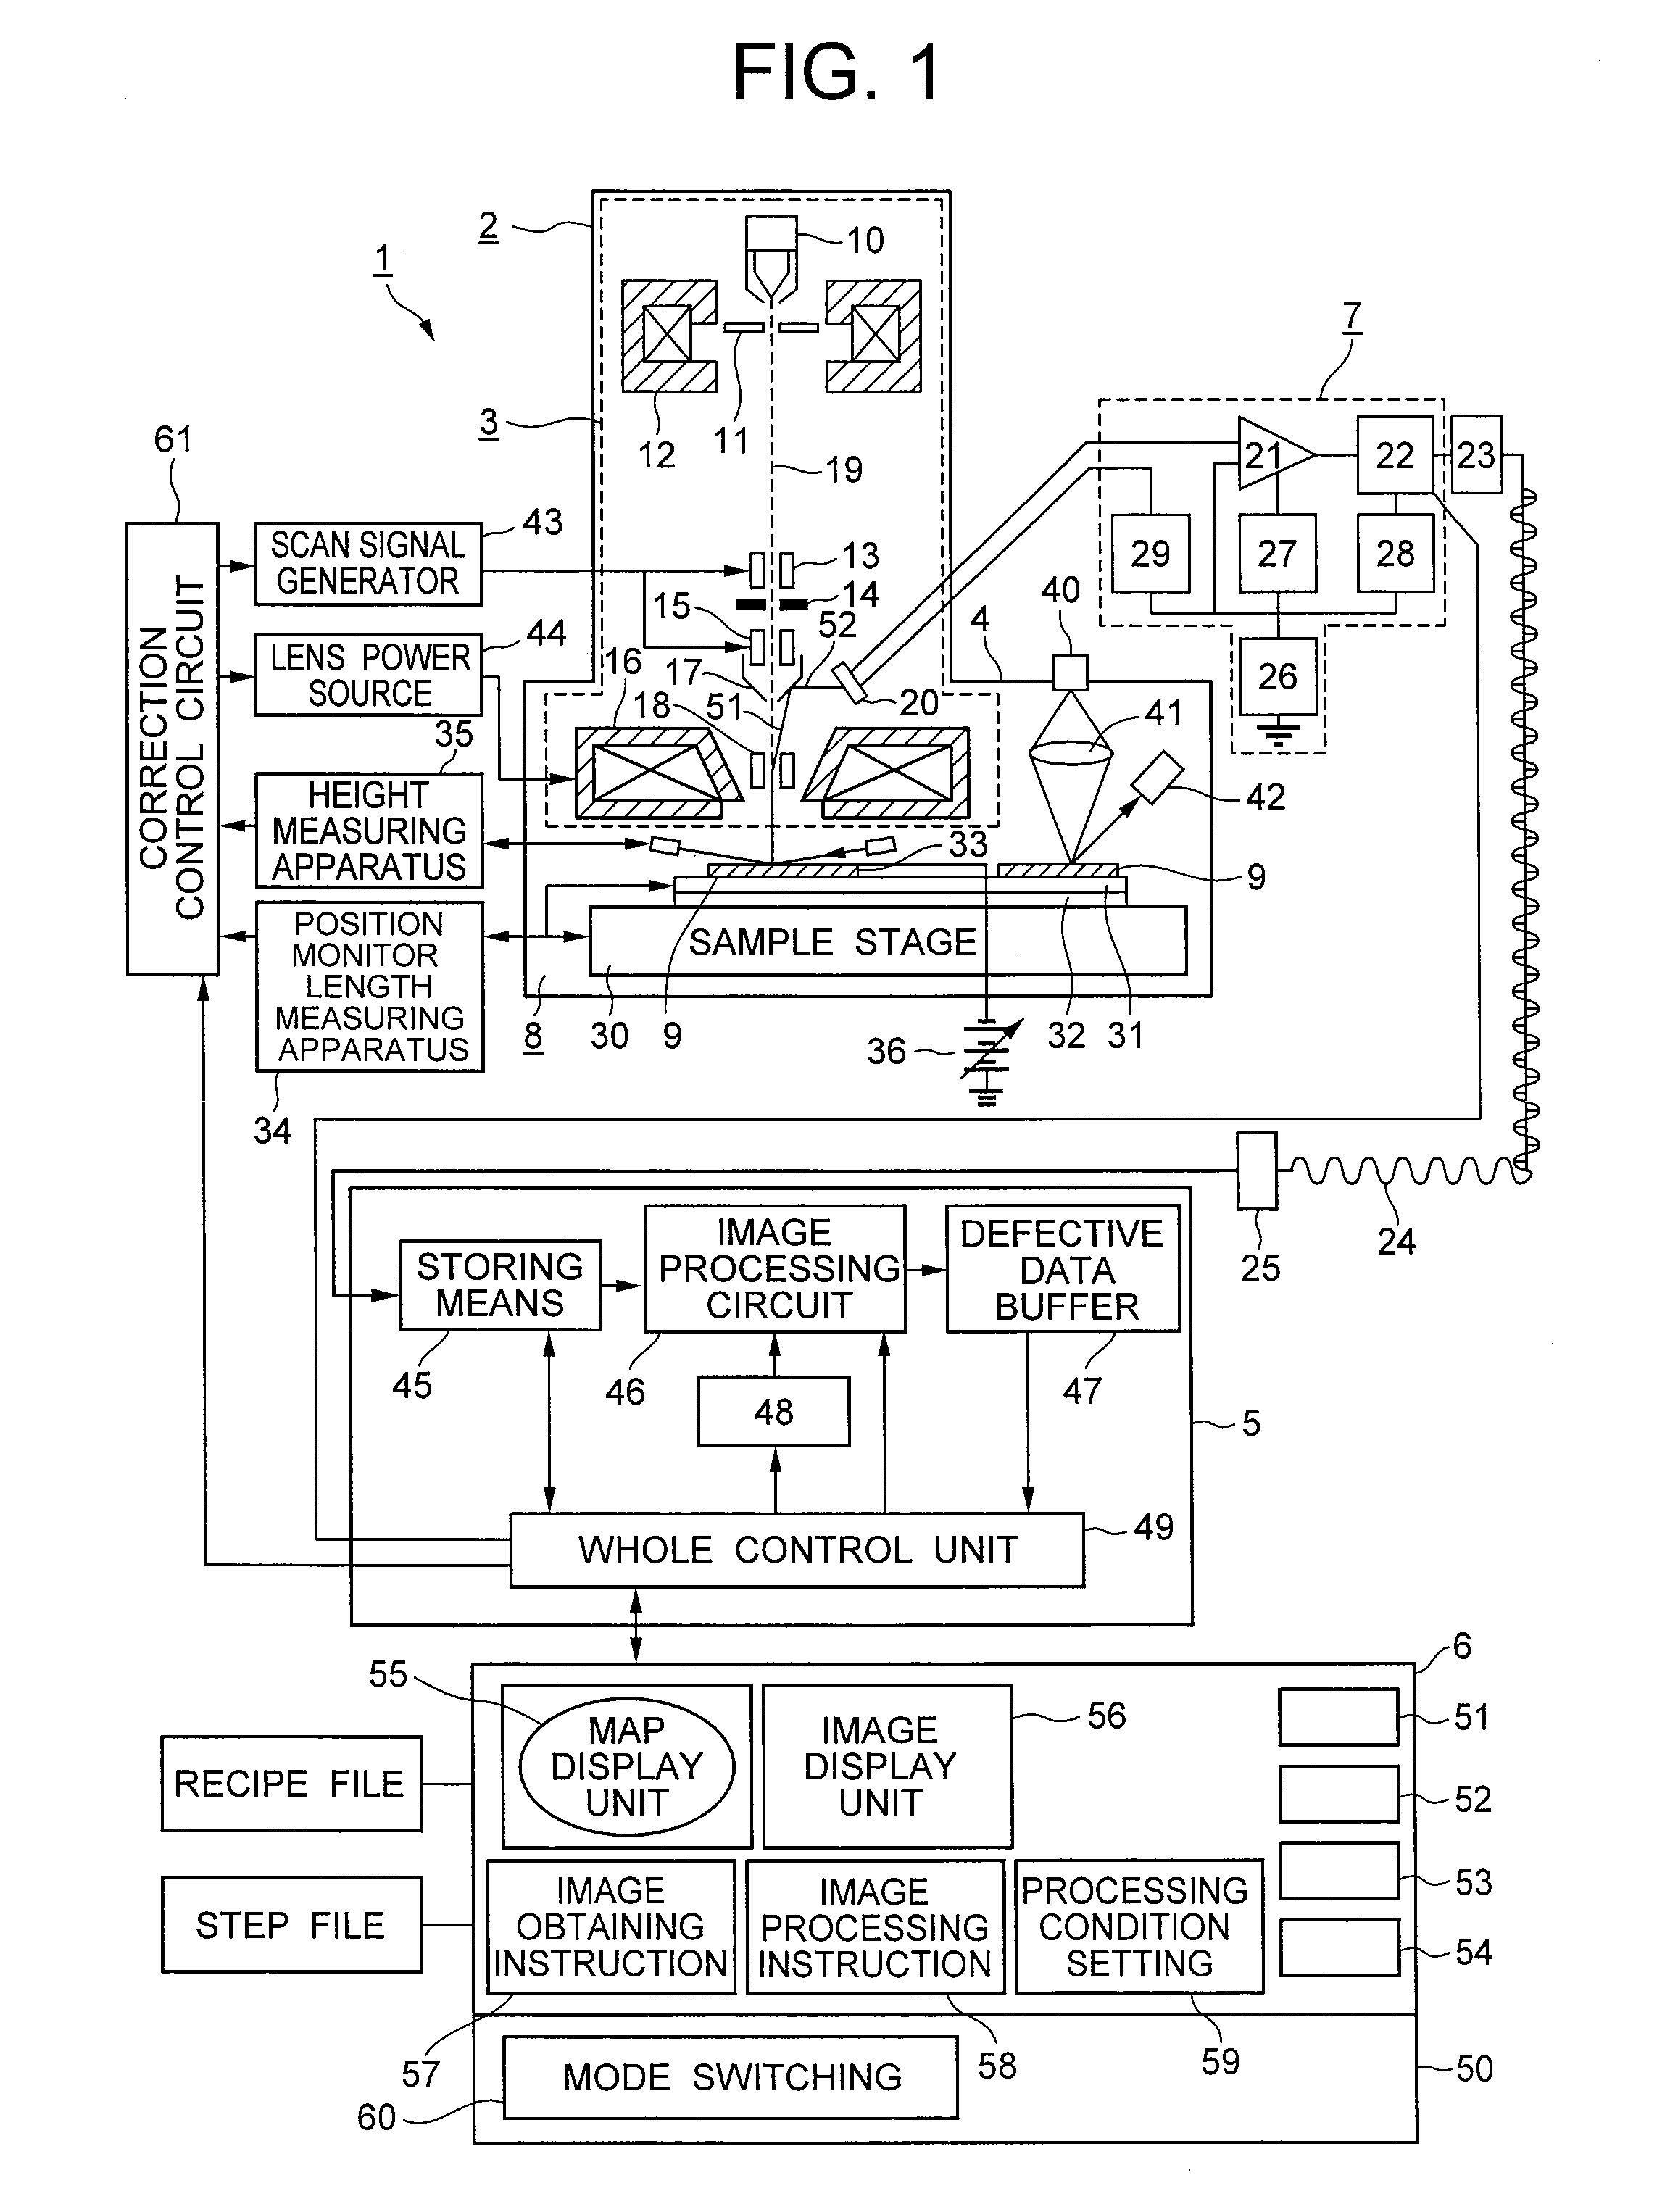 Inspection apparatus for inspecting patterns of a substrate